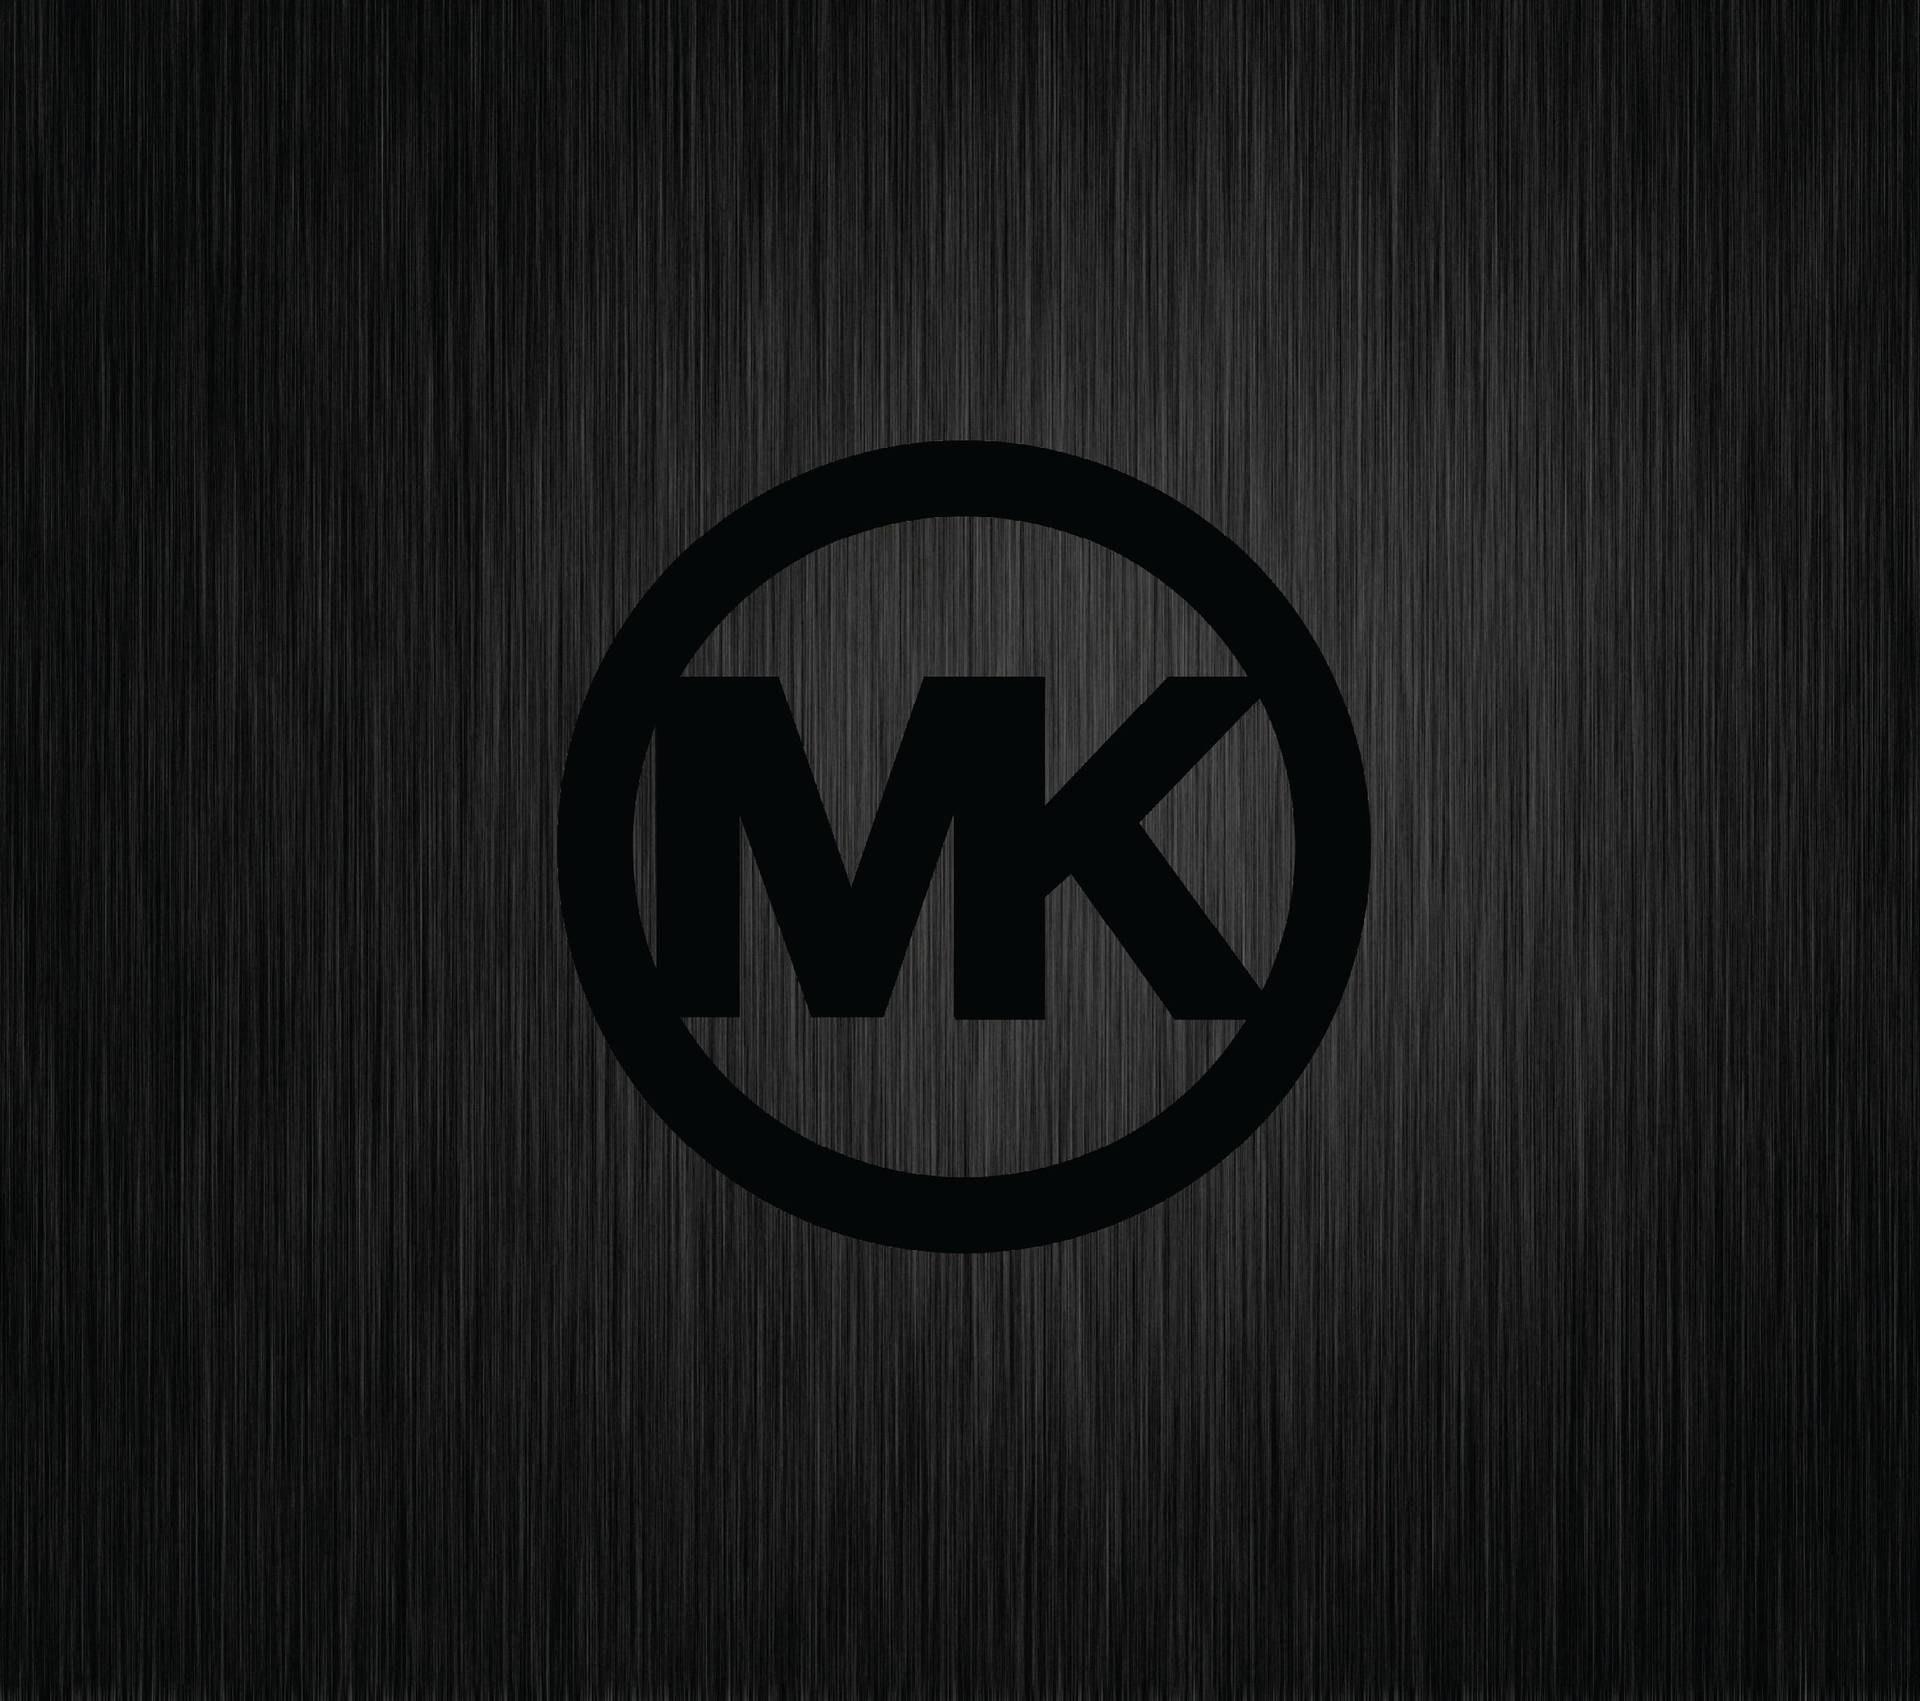 2601X2305 Michael Kors Wallpaper and Background